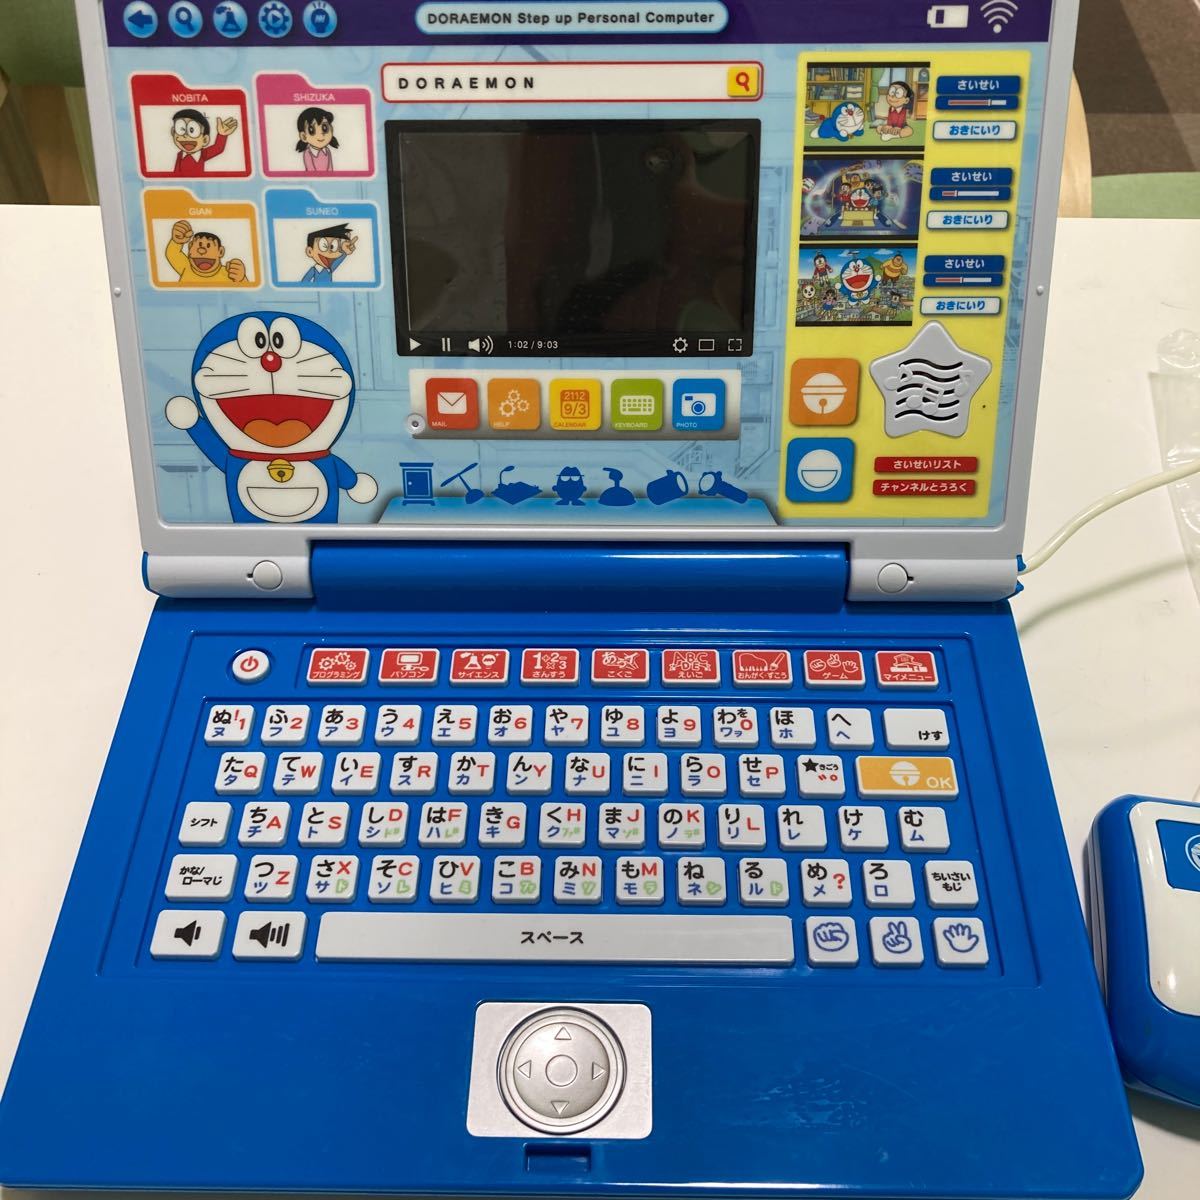 *11844 Doraemon step up personal computer operation not yet verification 